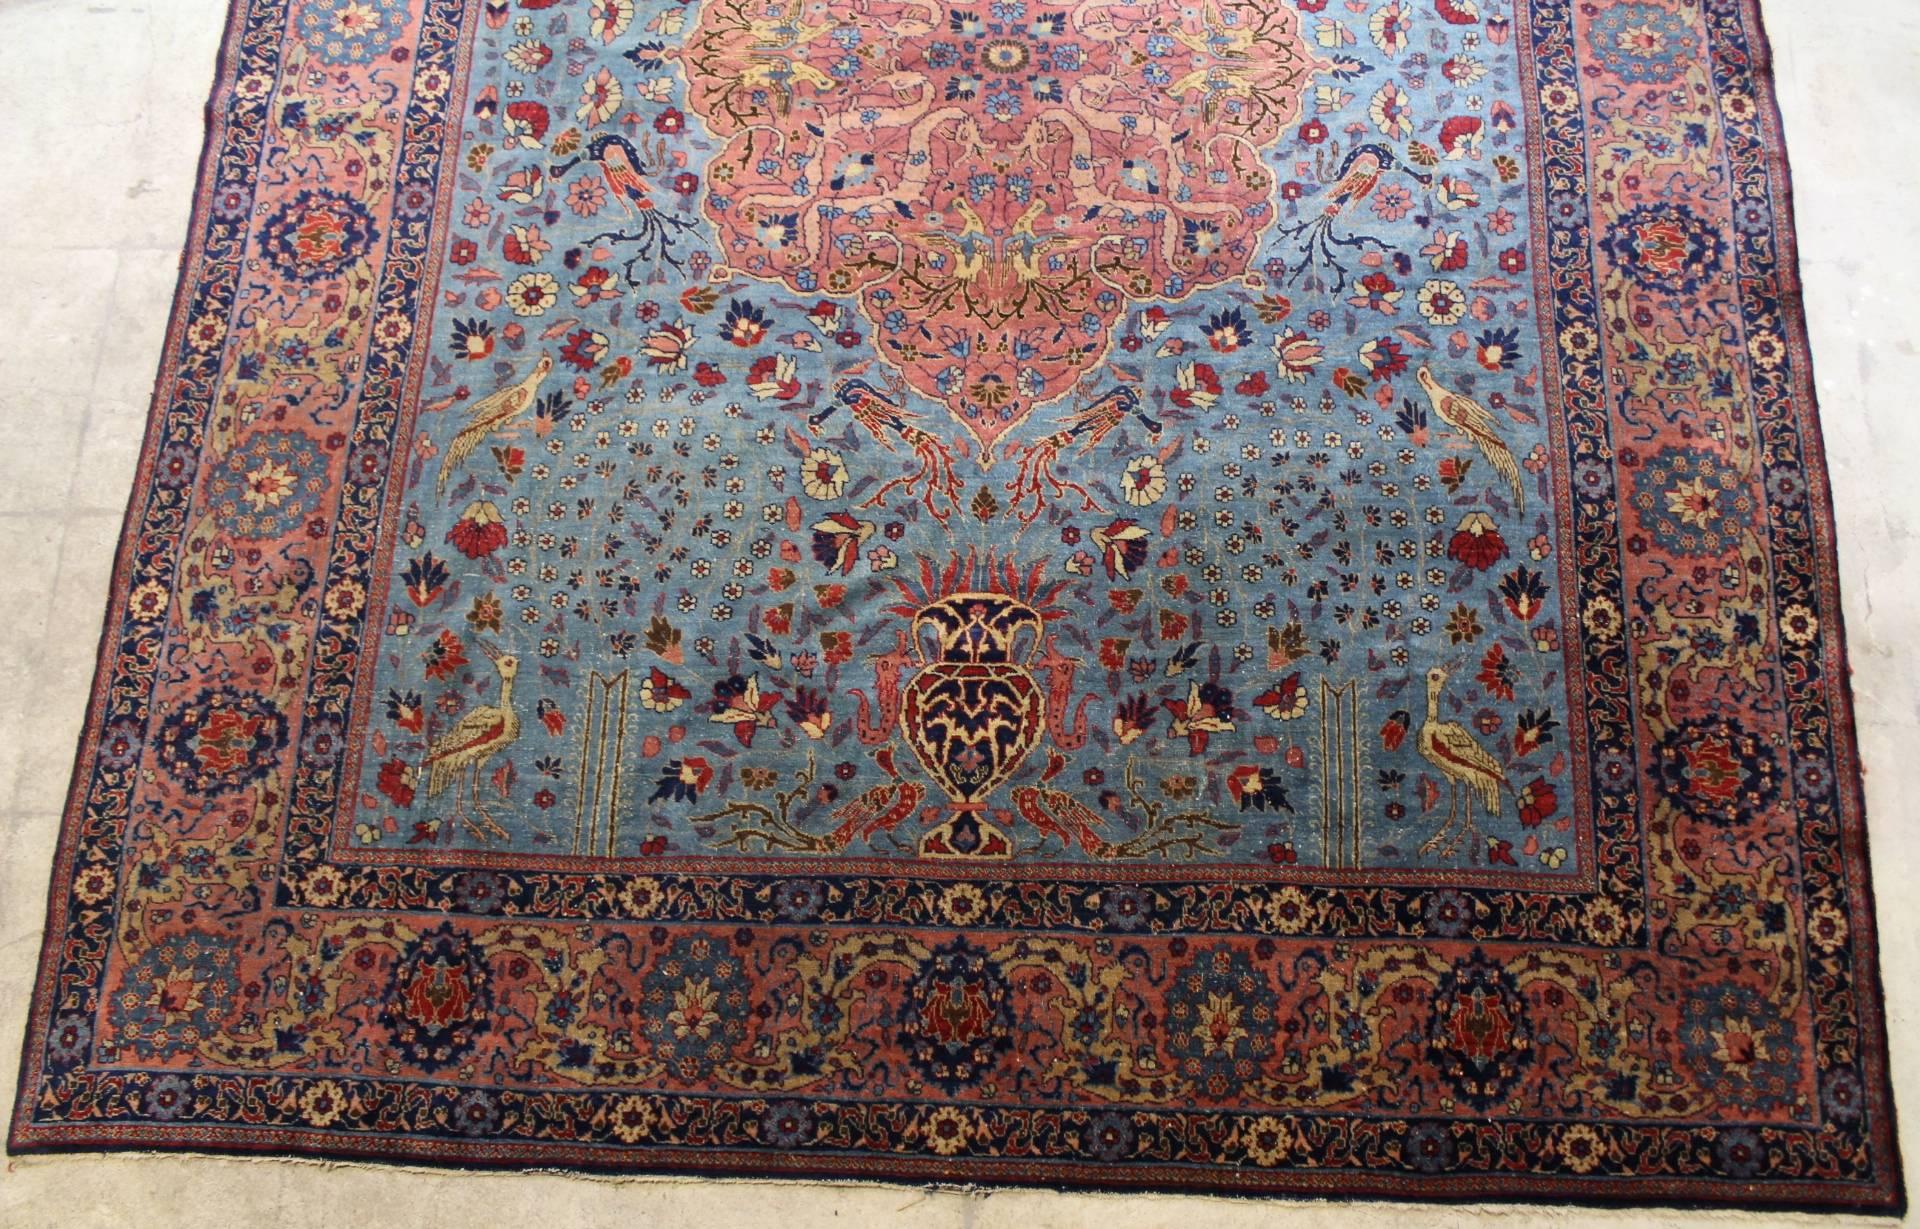 Large shiny Tabriz carpet with animal themes and attractive colours. The carpet is in its very good original condition without repairs and has been professionally cleaned.